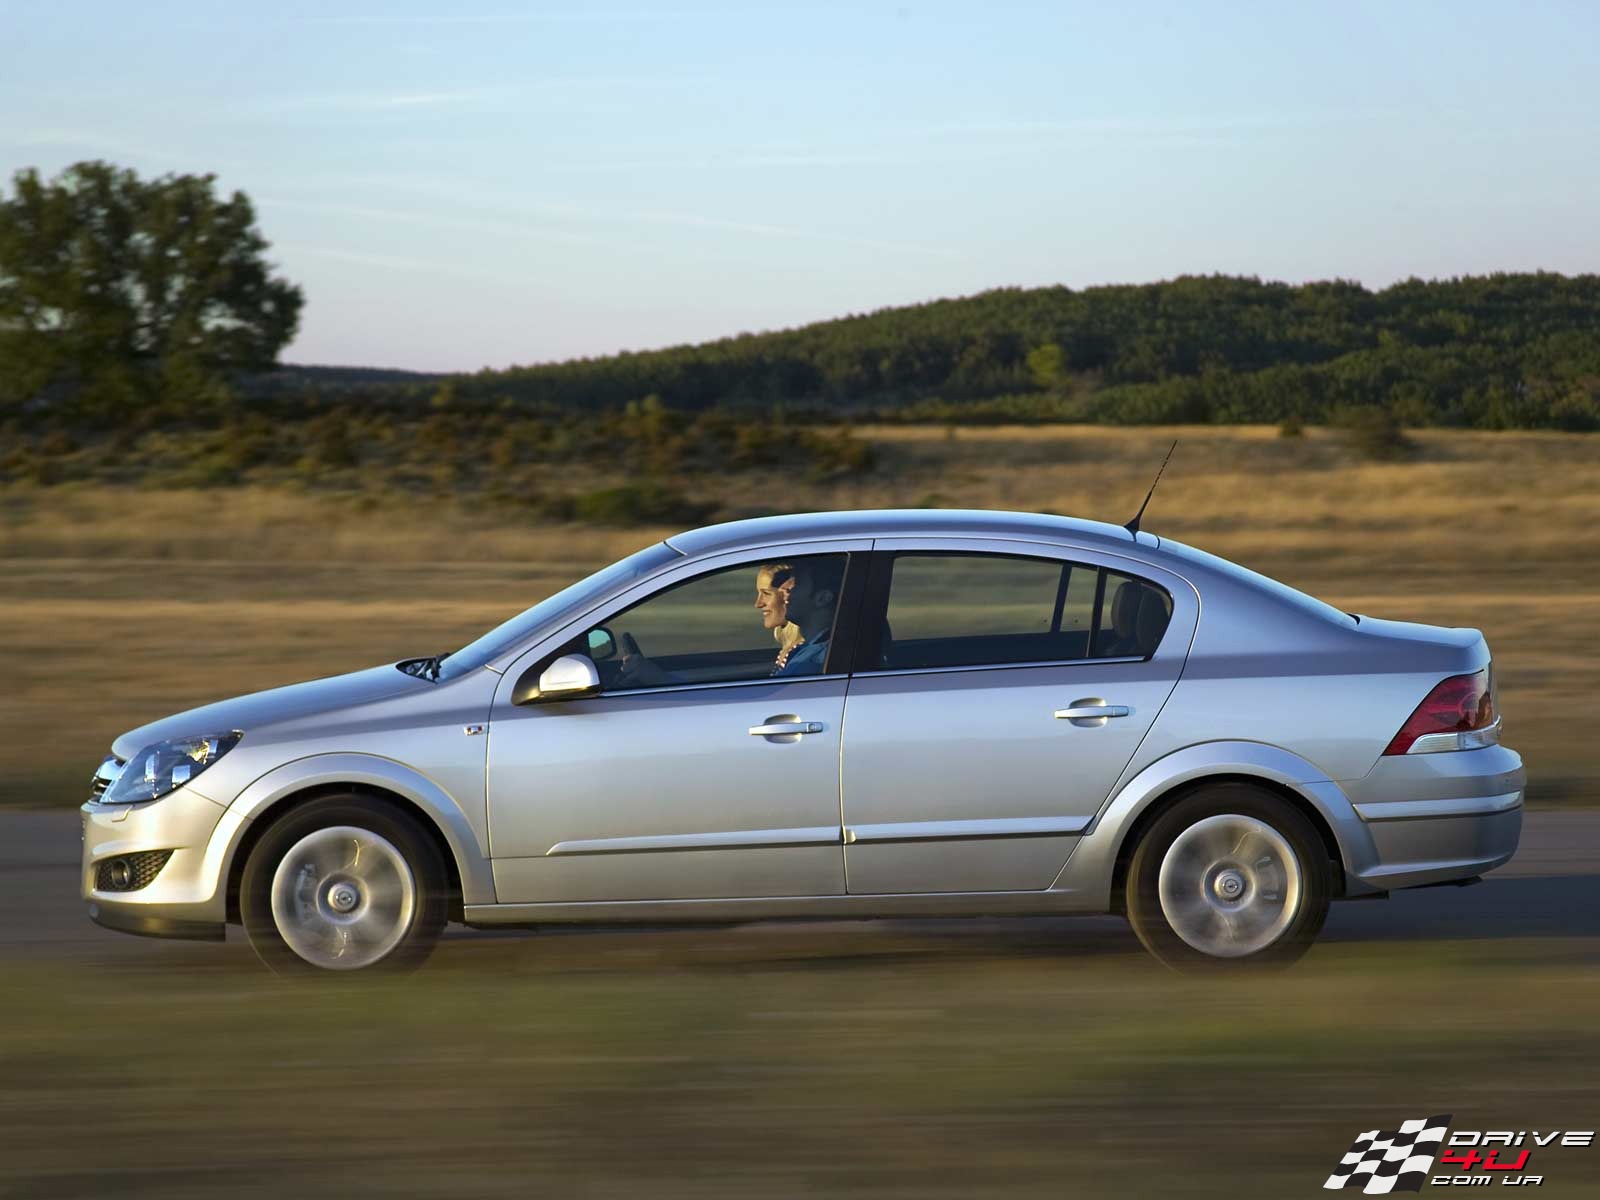 Opel Astra H Sedan. View Download Wallpaper. 1600x1200. Comments